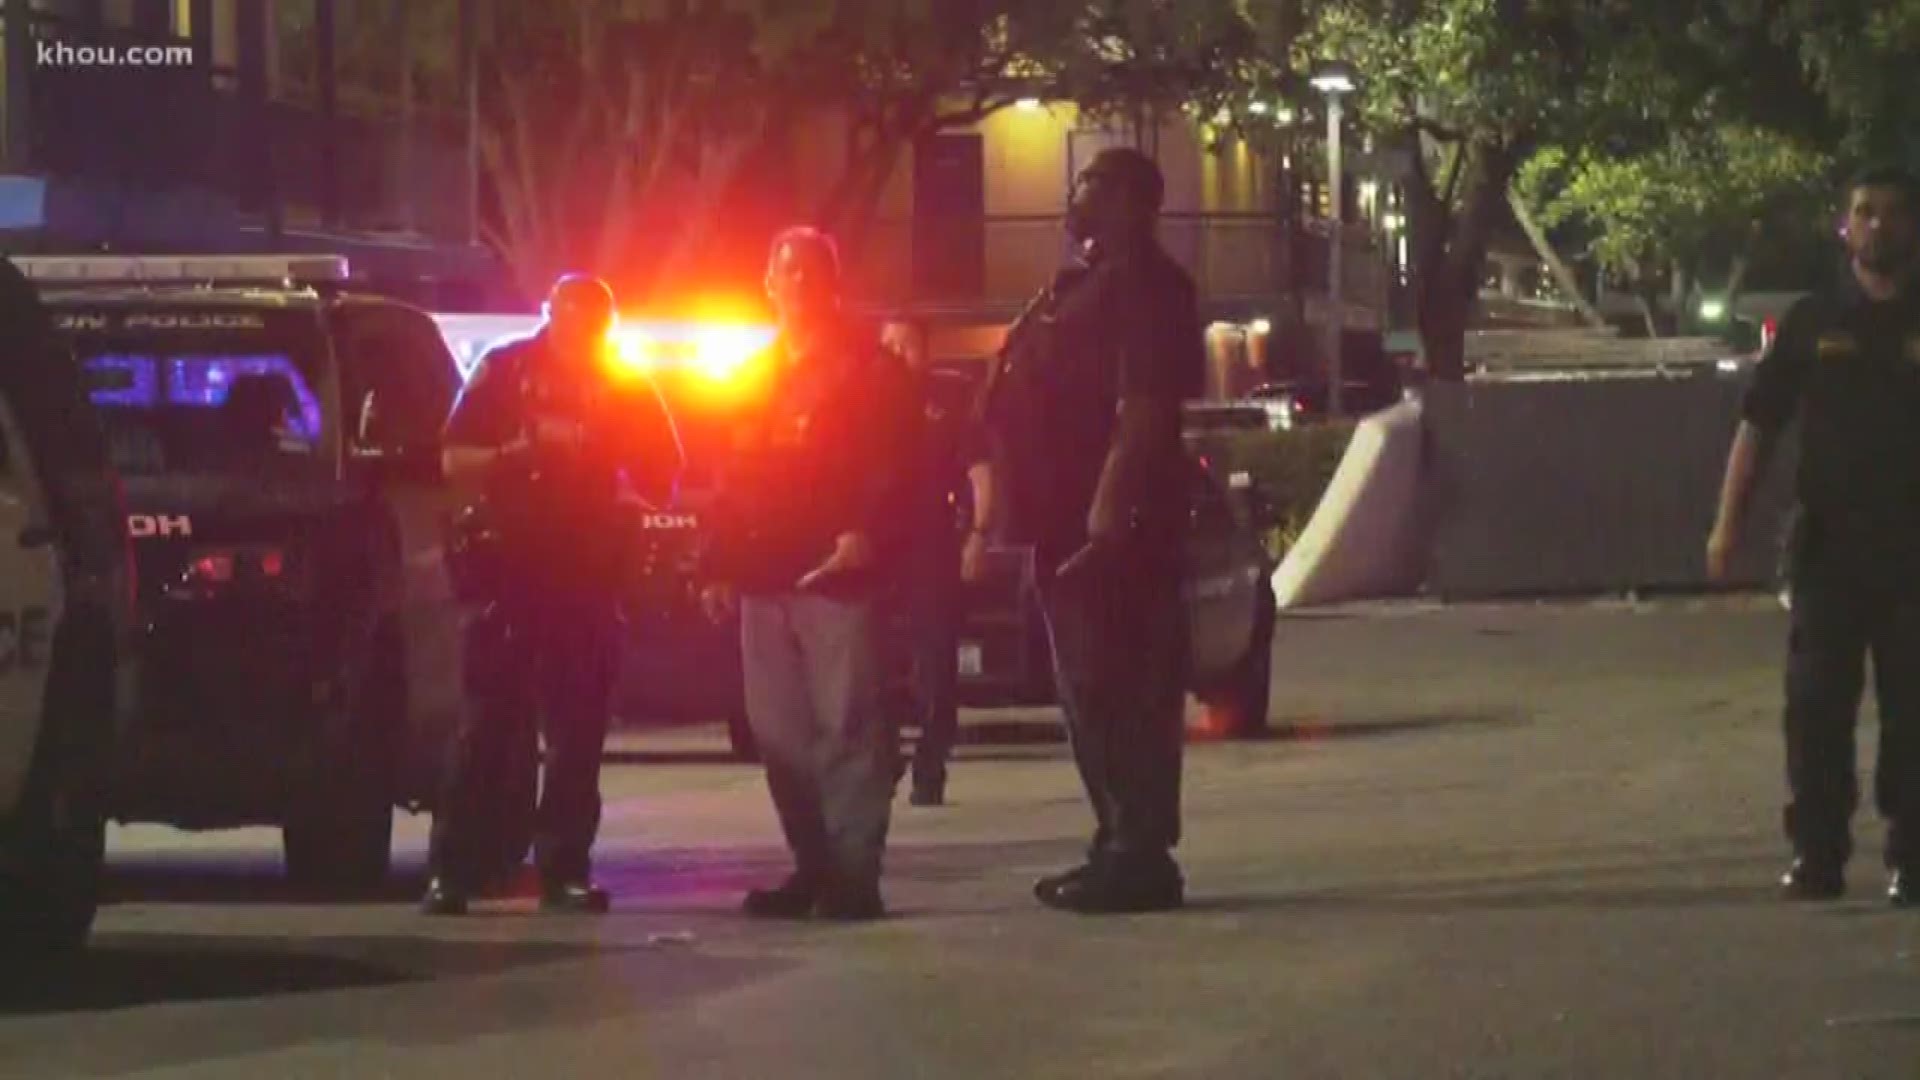 A 16-year-old girl was wounded in a possibly gang-related shooting at a southwest Houston apartment complex overnight.